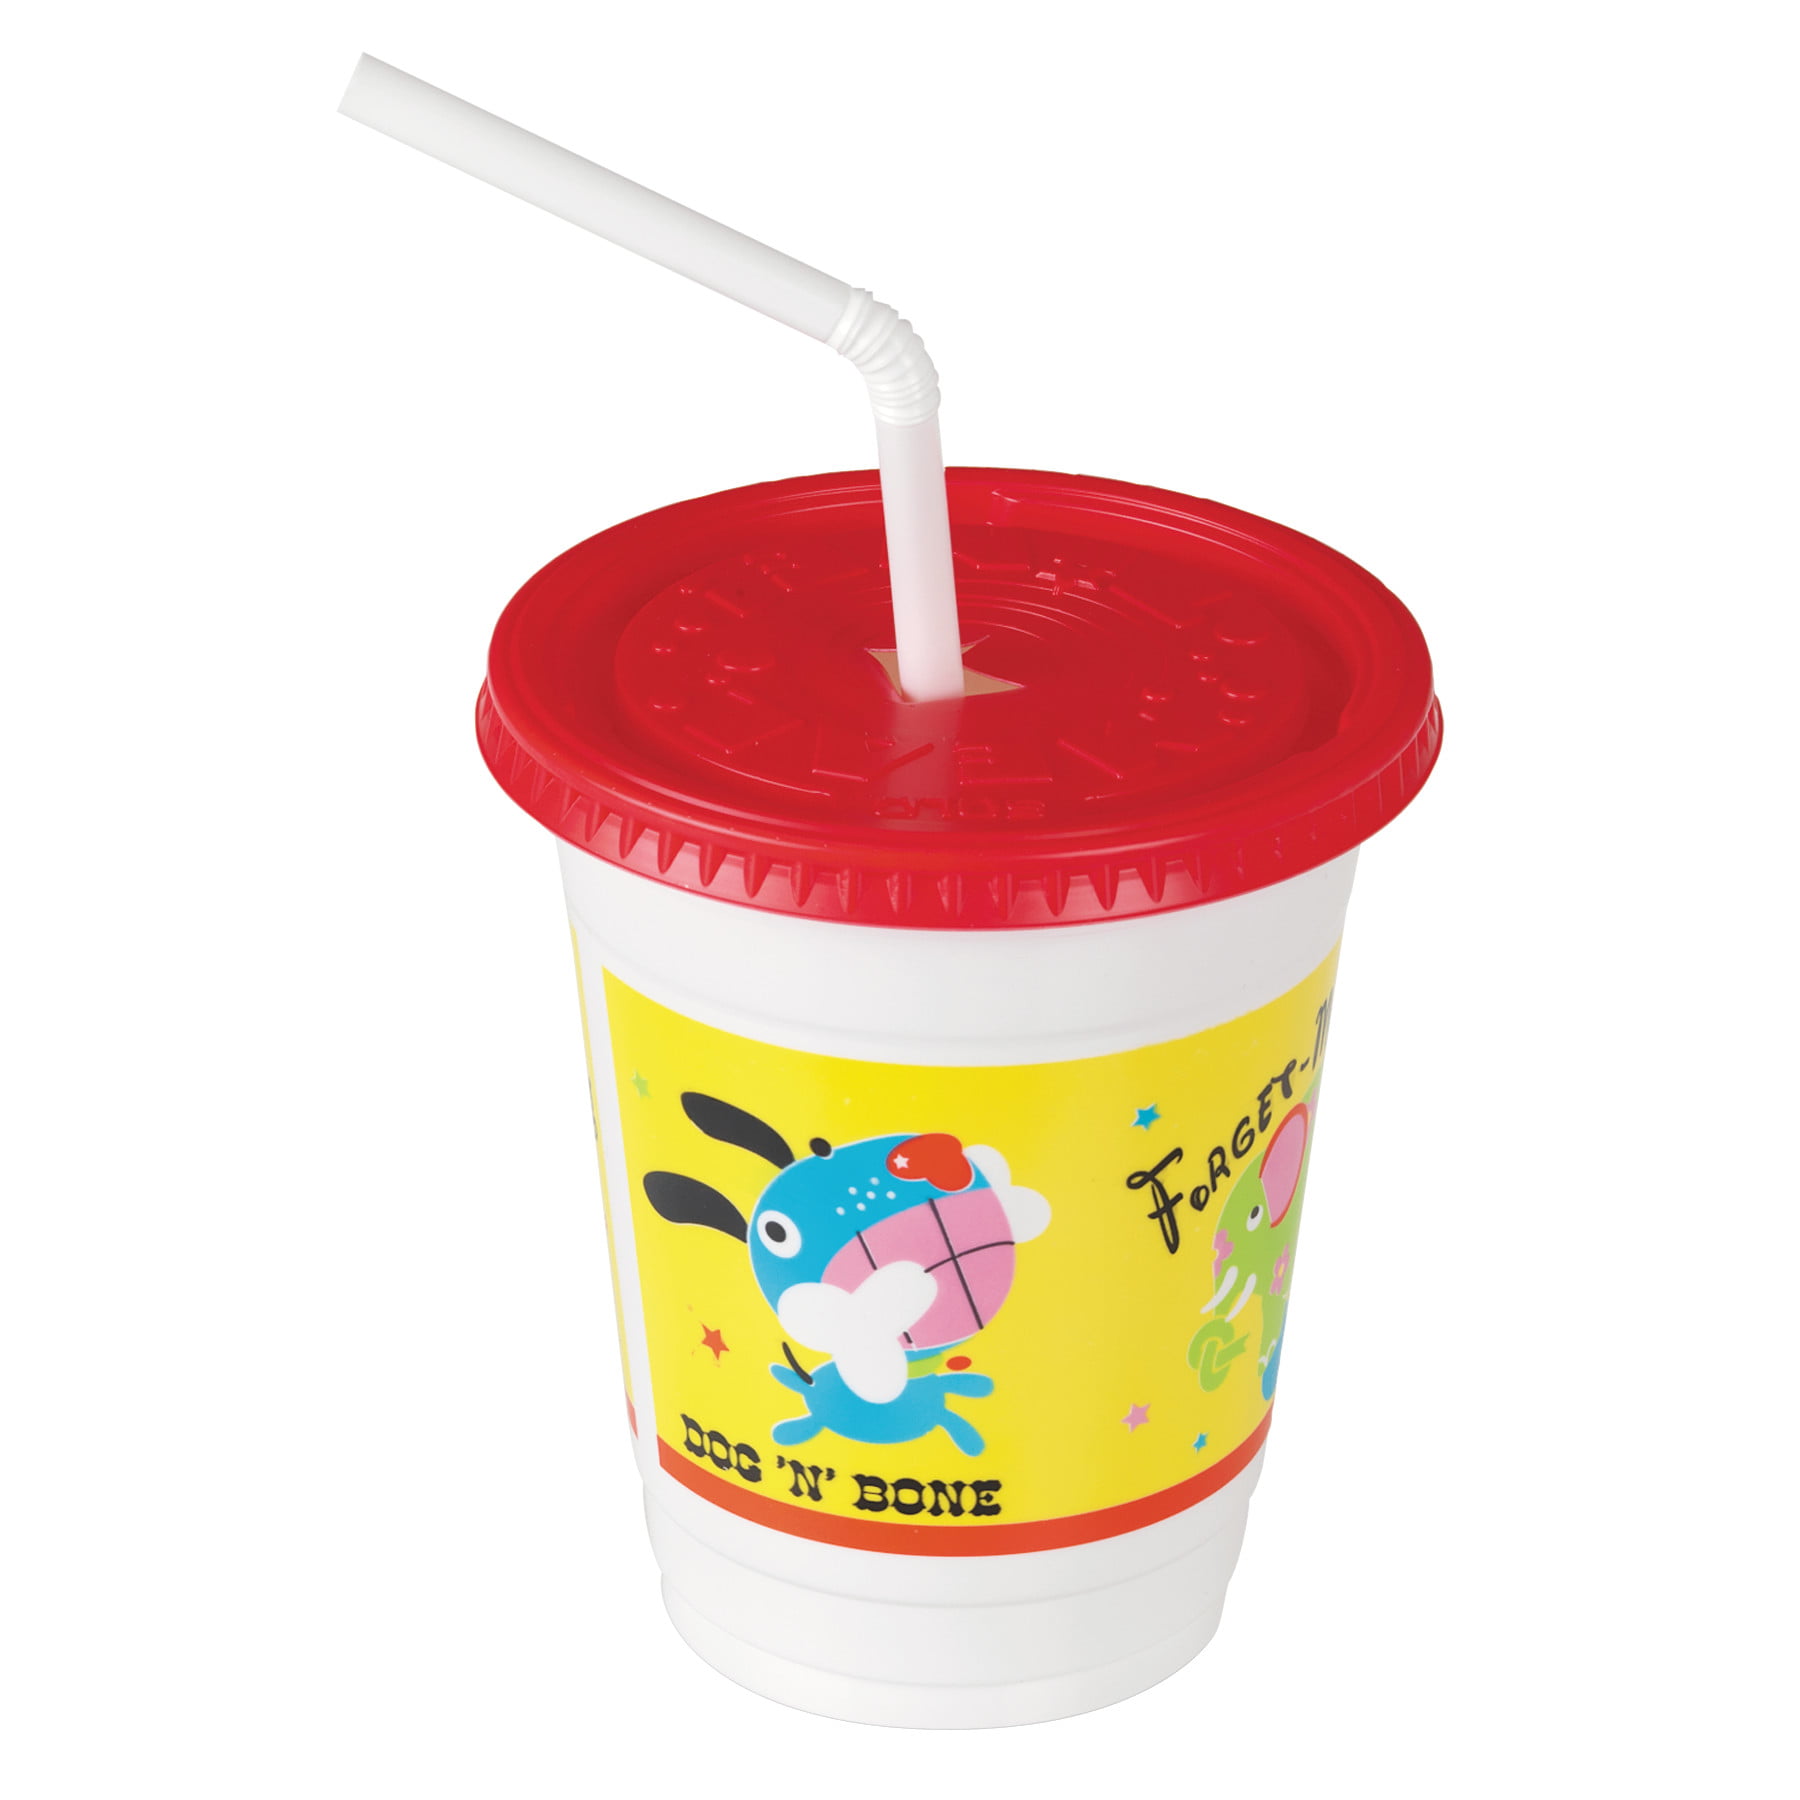 50 Pack] 12 OZ Plastic Kids Cup with Lid and Straw - Spill Proot, BPA Free  & Food Safe Fun Cartoon Cups with Reusable Red Lids and Curly Straws for  Parites, Cold